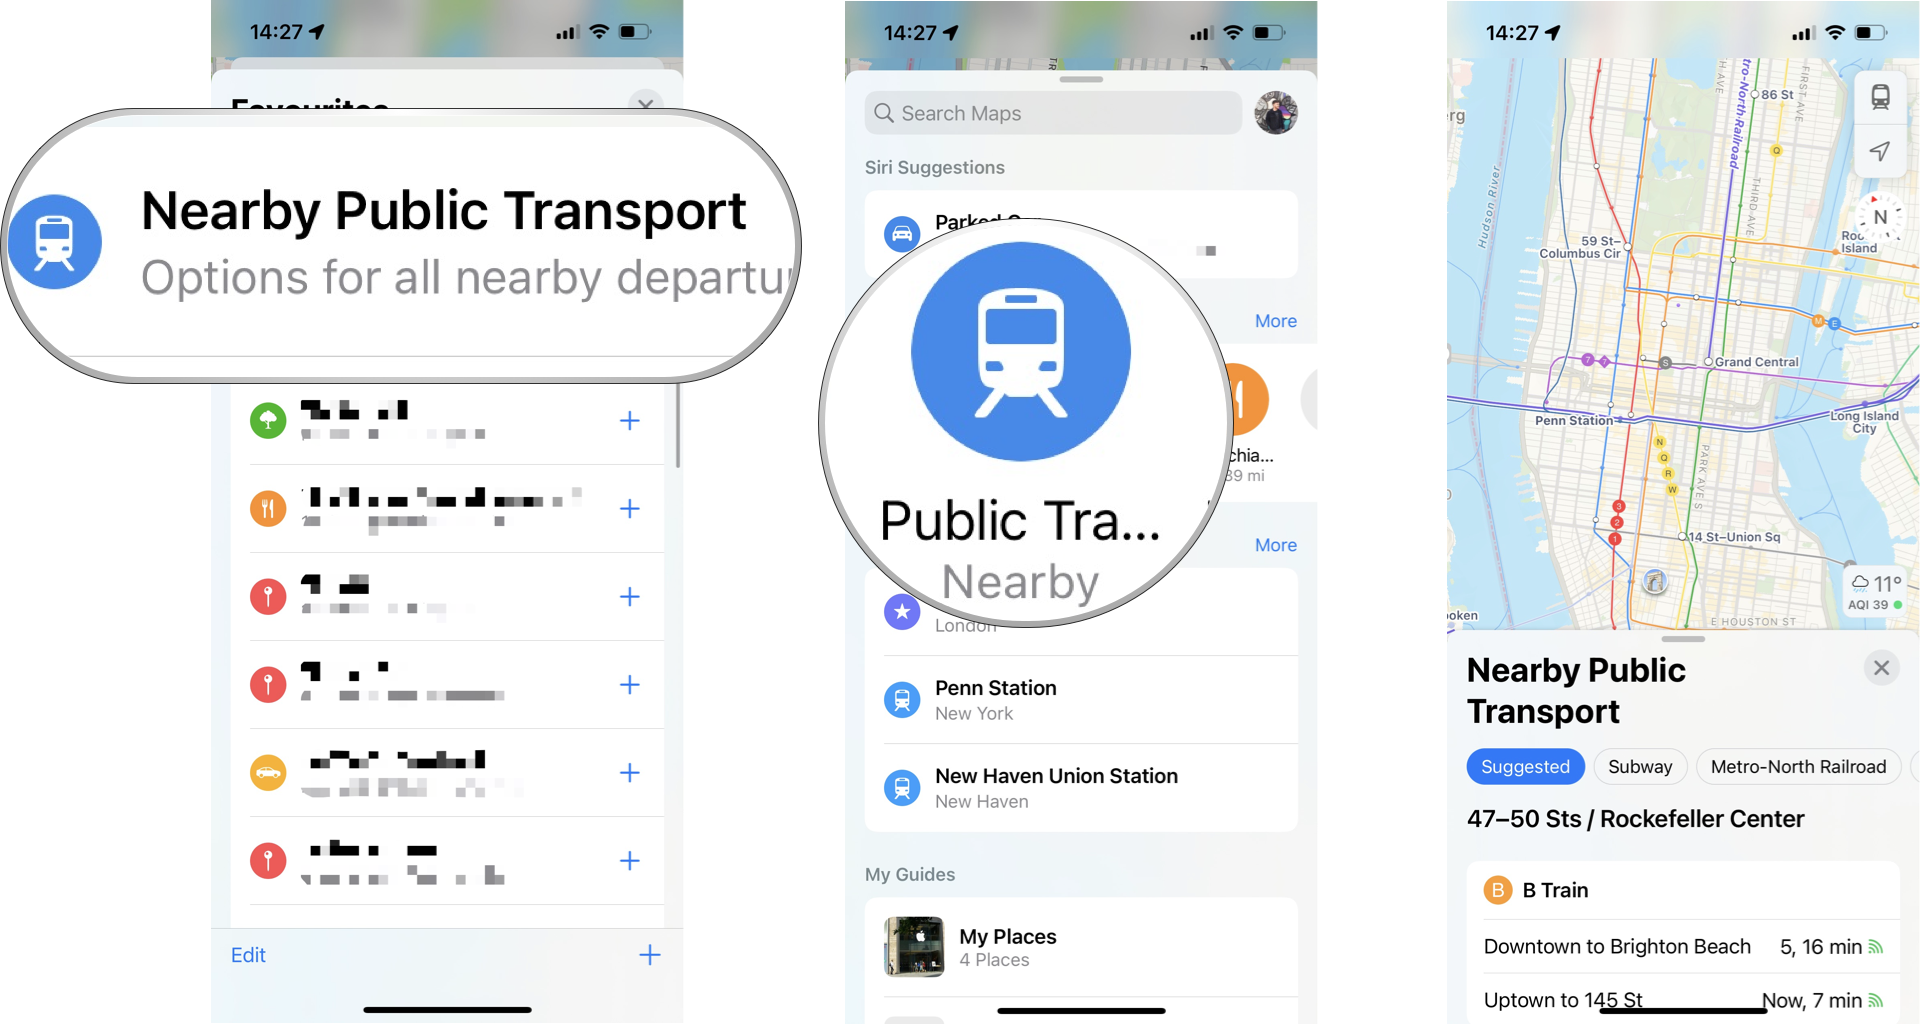 How to find nearby transit routes: Tap on Nearby Transit to add it to your Favorites, tap on Transit in your Favorites